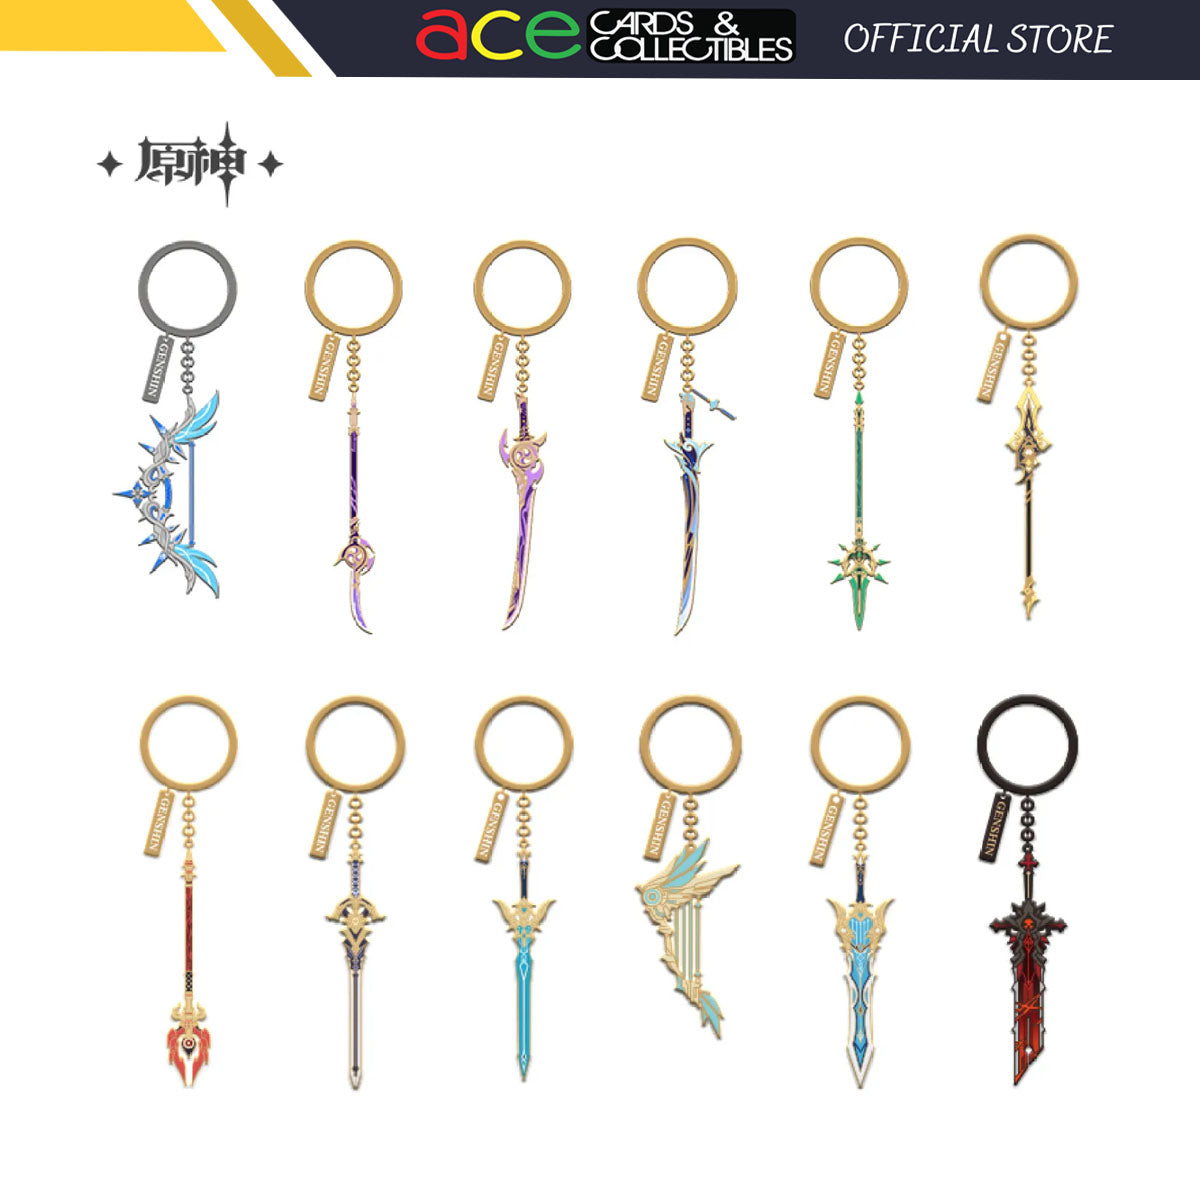 miHoYo -Genshin Impact- Weapon Metal Charm Collection-Freedom-Sworn-miHoYo-Ace Cards & Collectibles